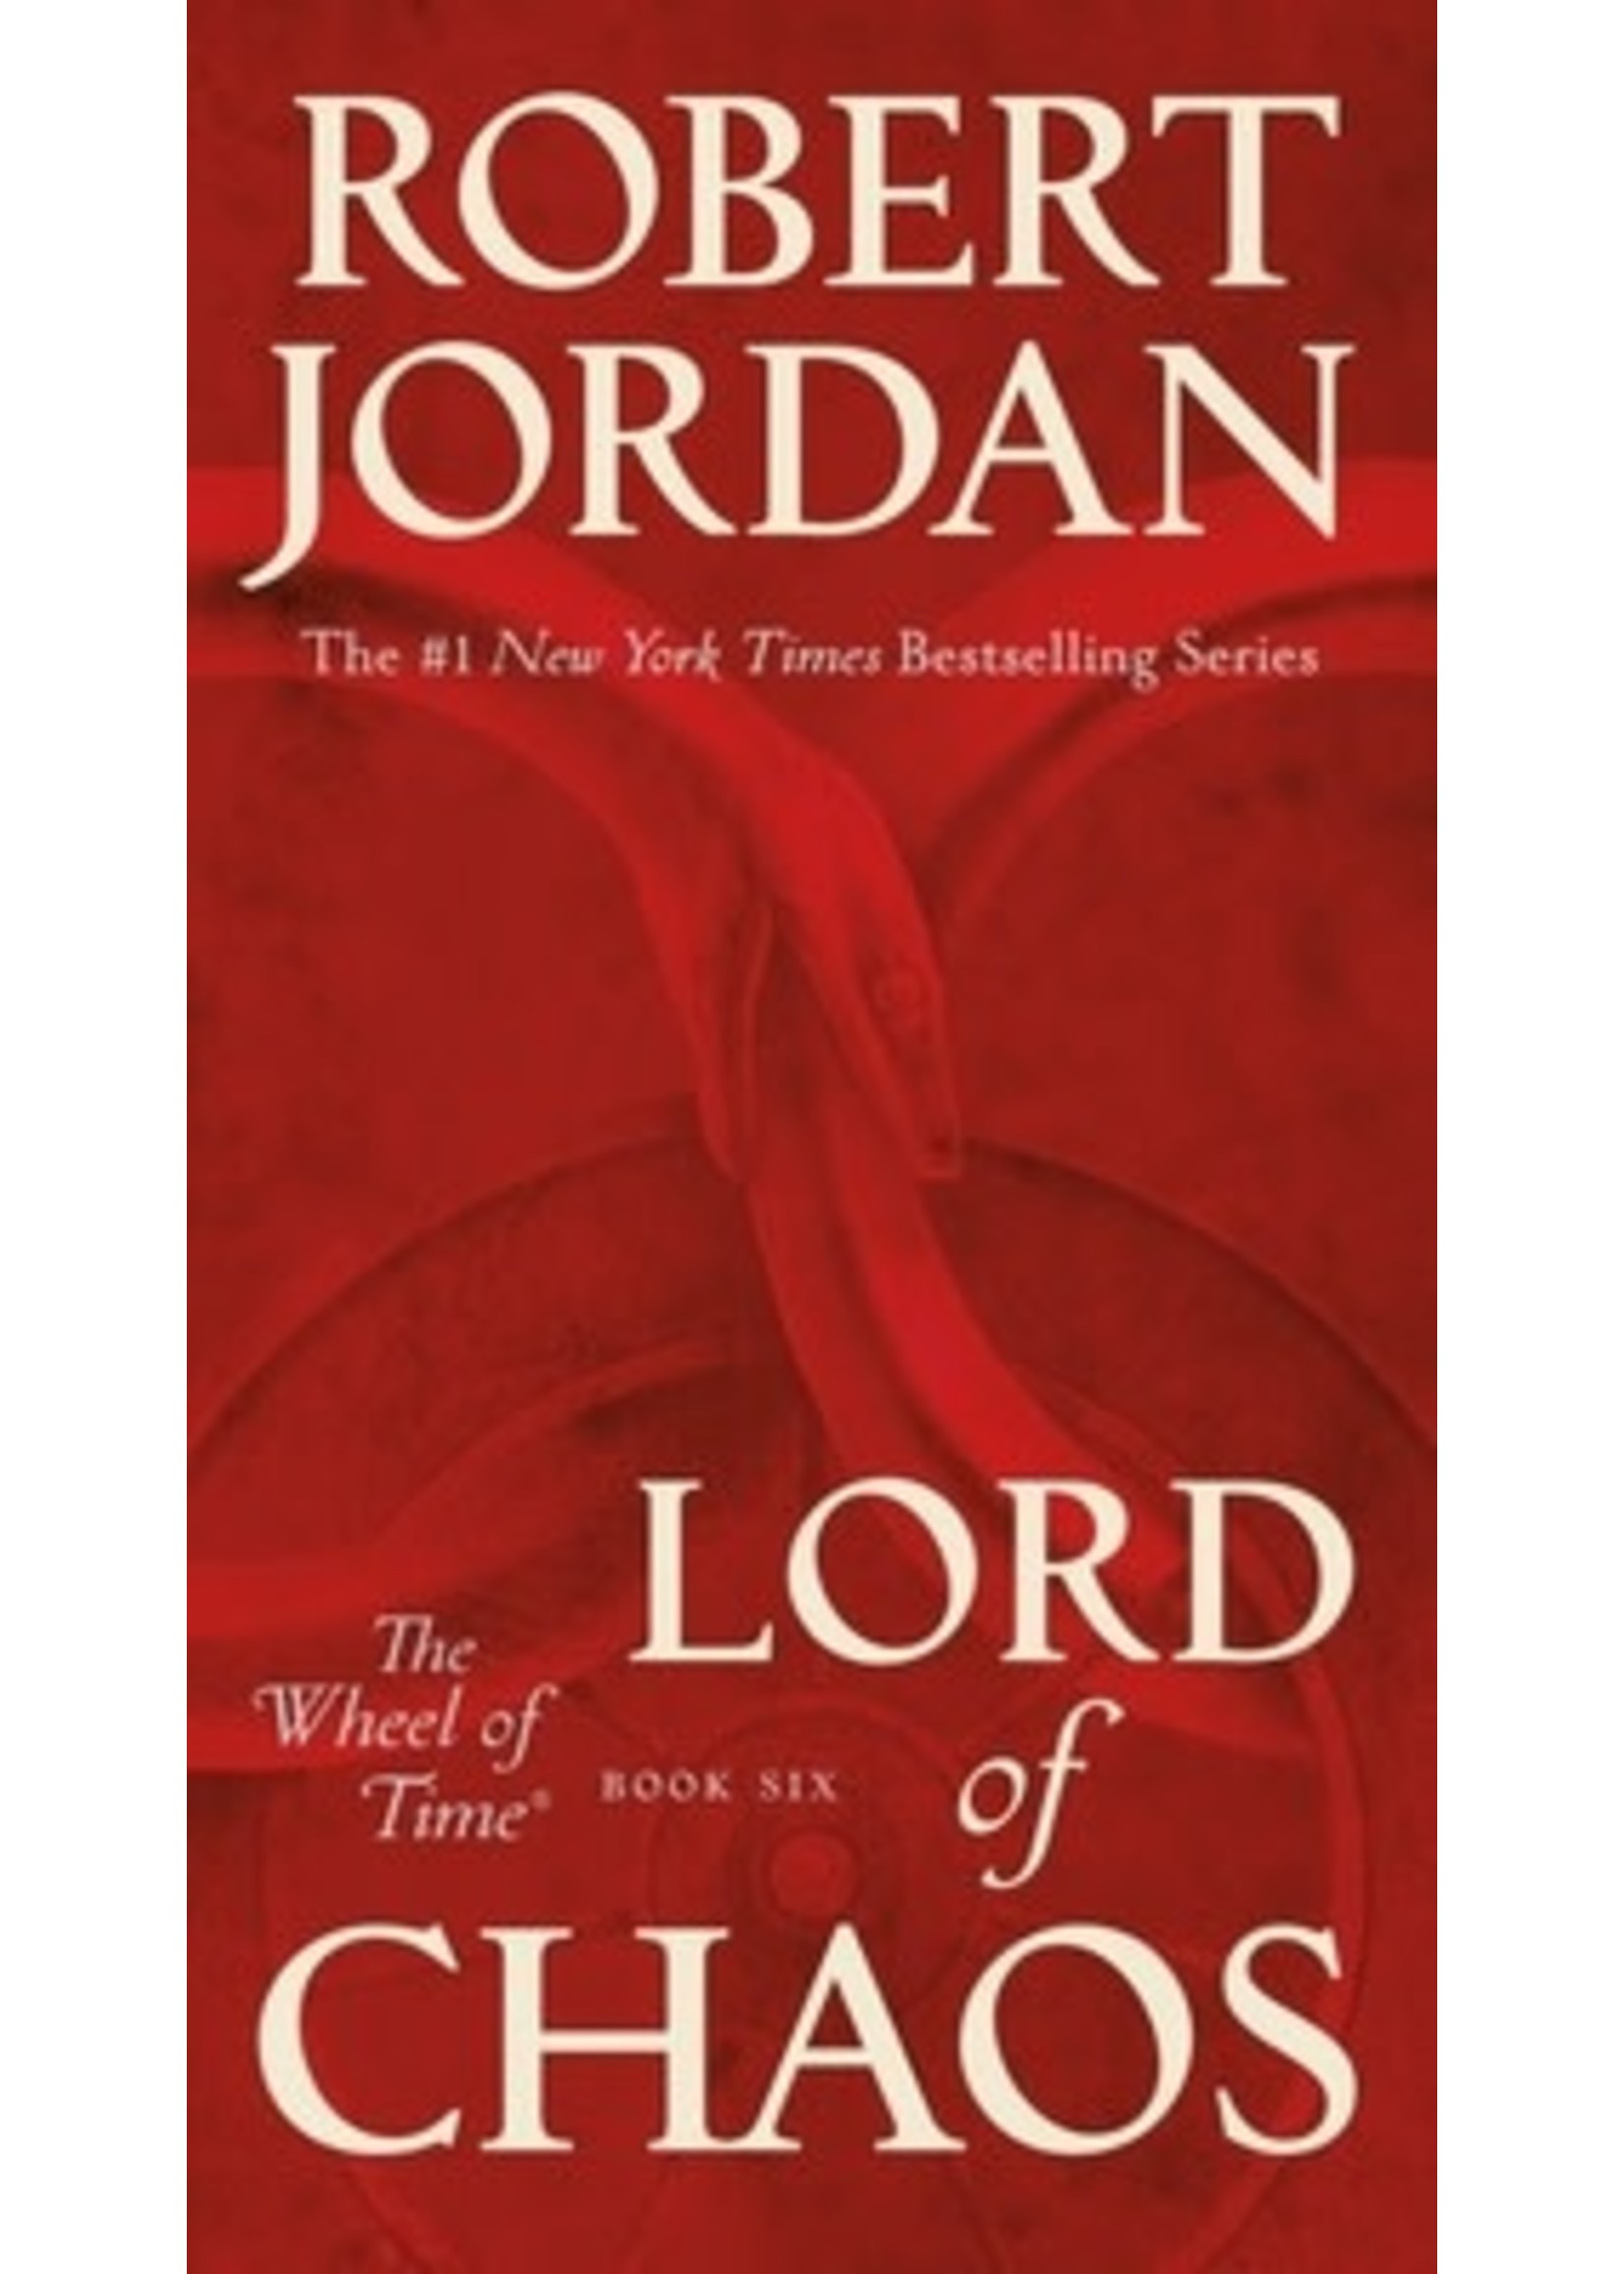 Lord of Chaos (The Wheel of Time #6) by Robert Jordan